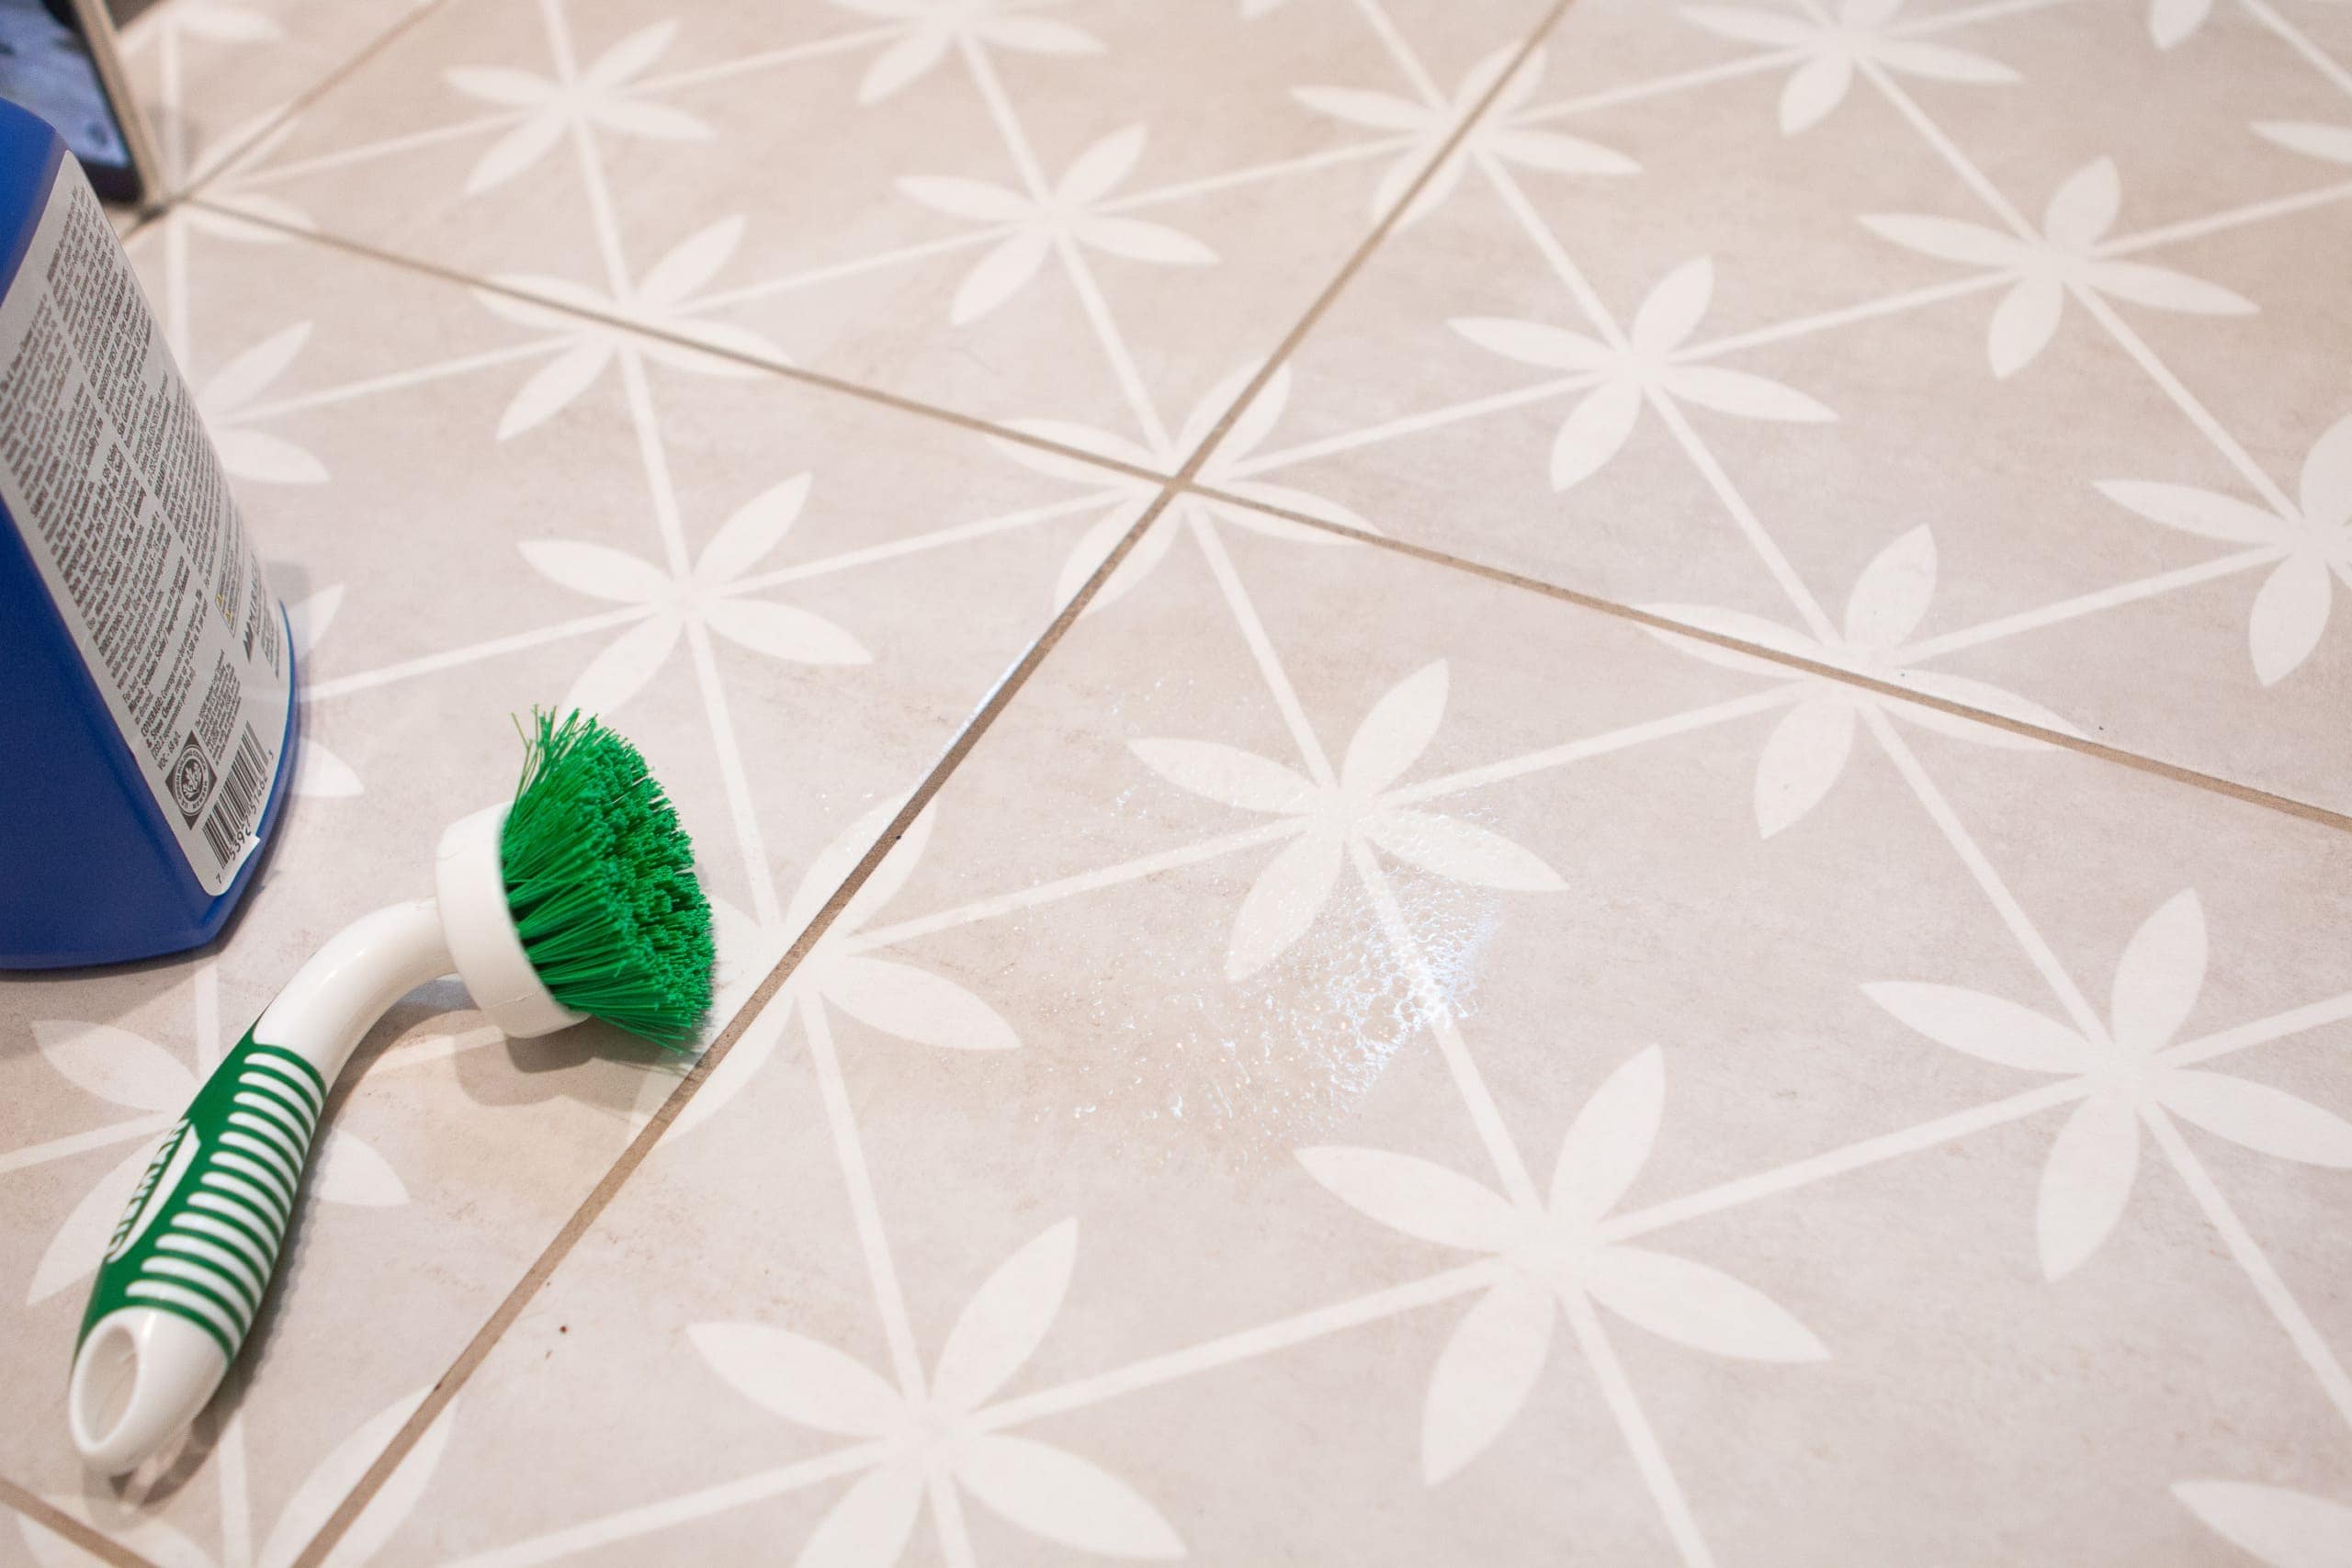 Use a brush to agitate the cleaning solution